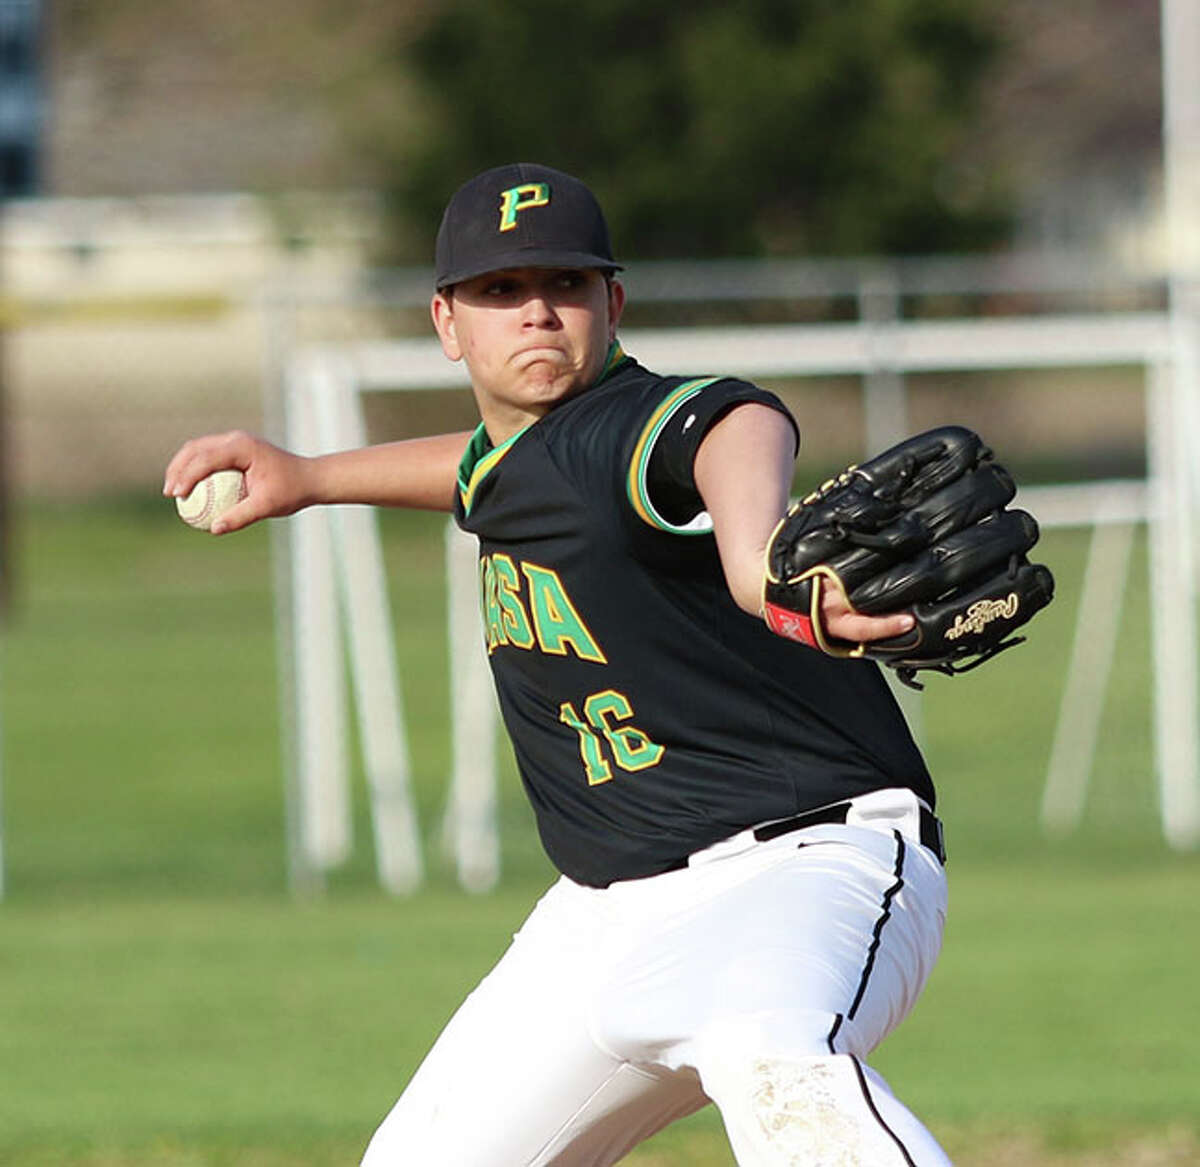 Southwestern pitcher Marcus Payne won his fourth start in a row to keep the Piasa Birds unbeaten in the SCC with a win over Pana on Tuesday in Brighton.